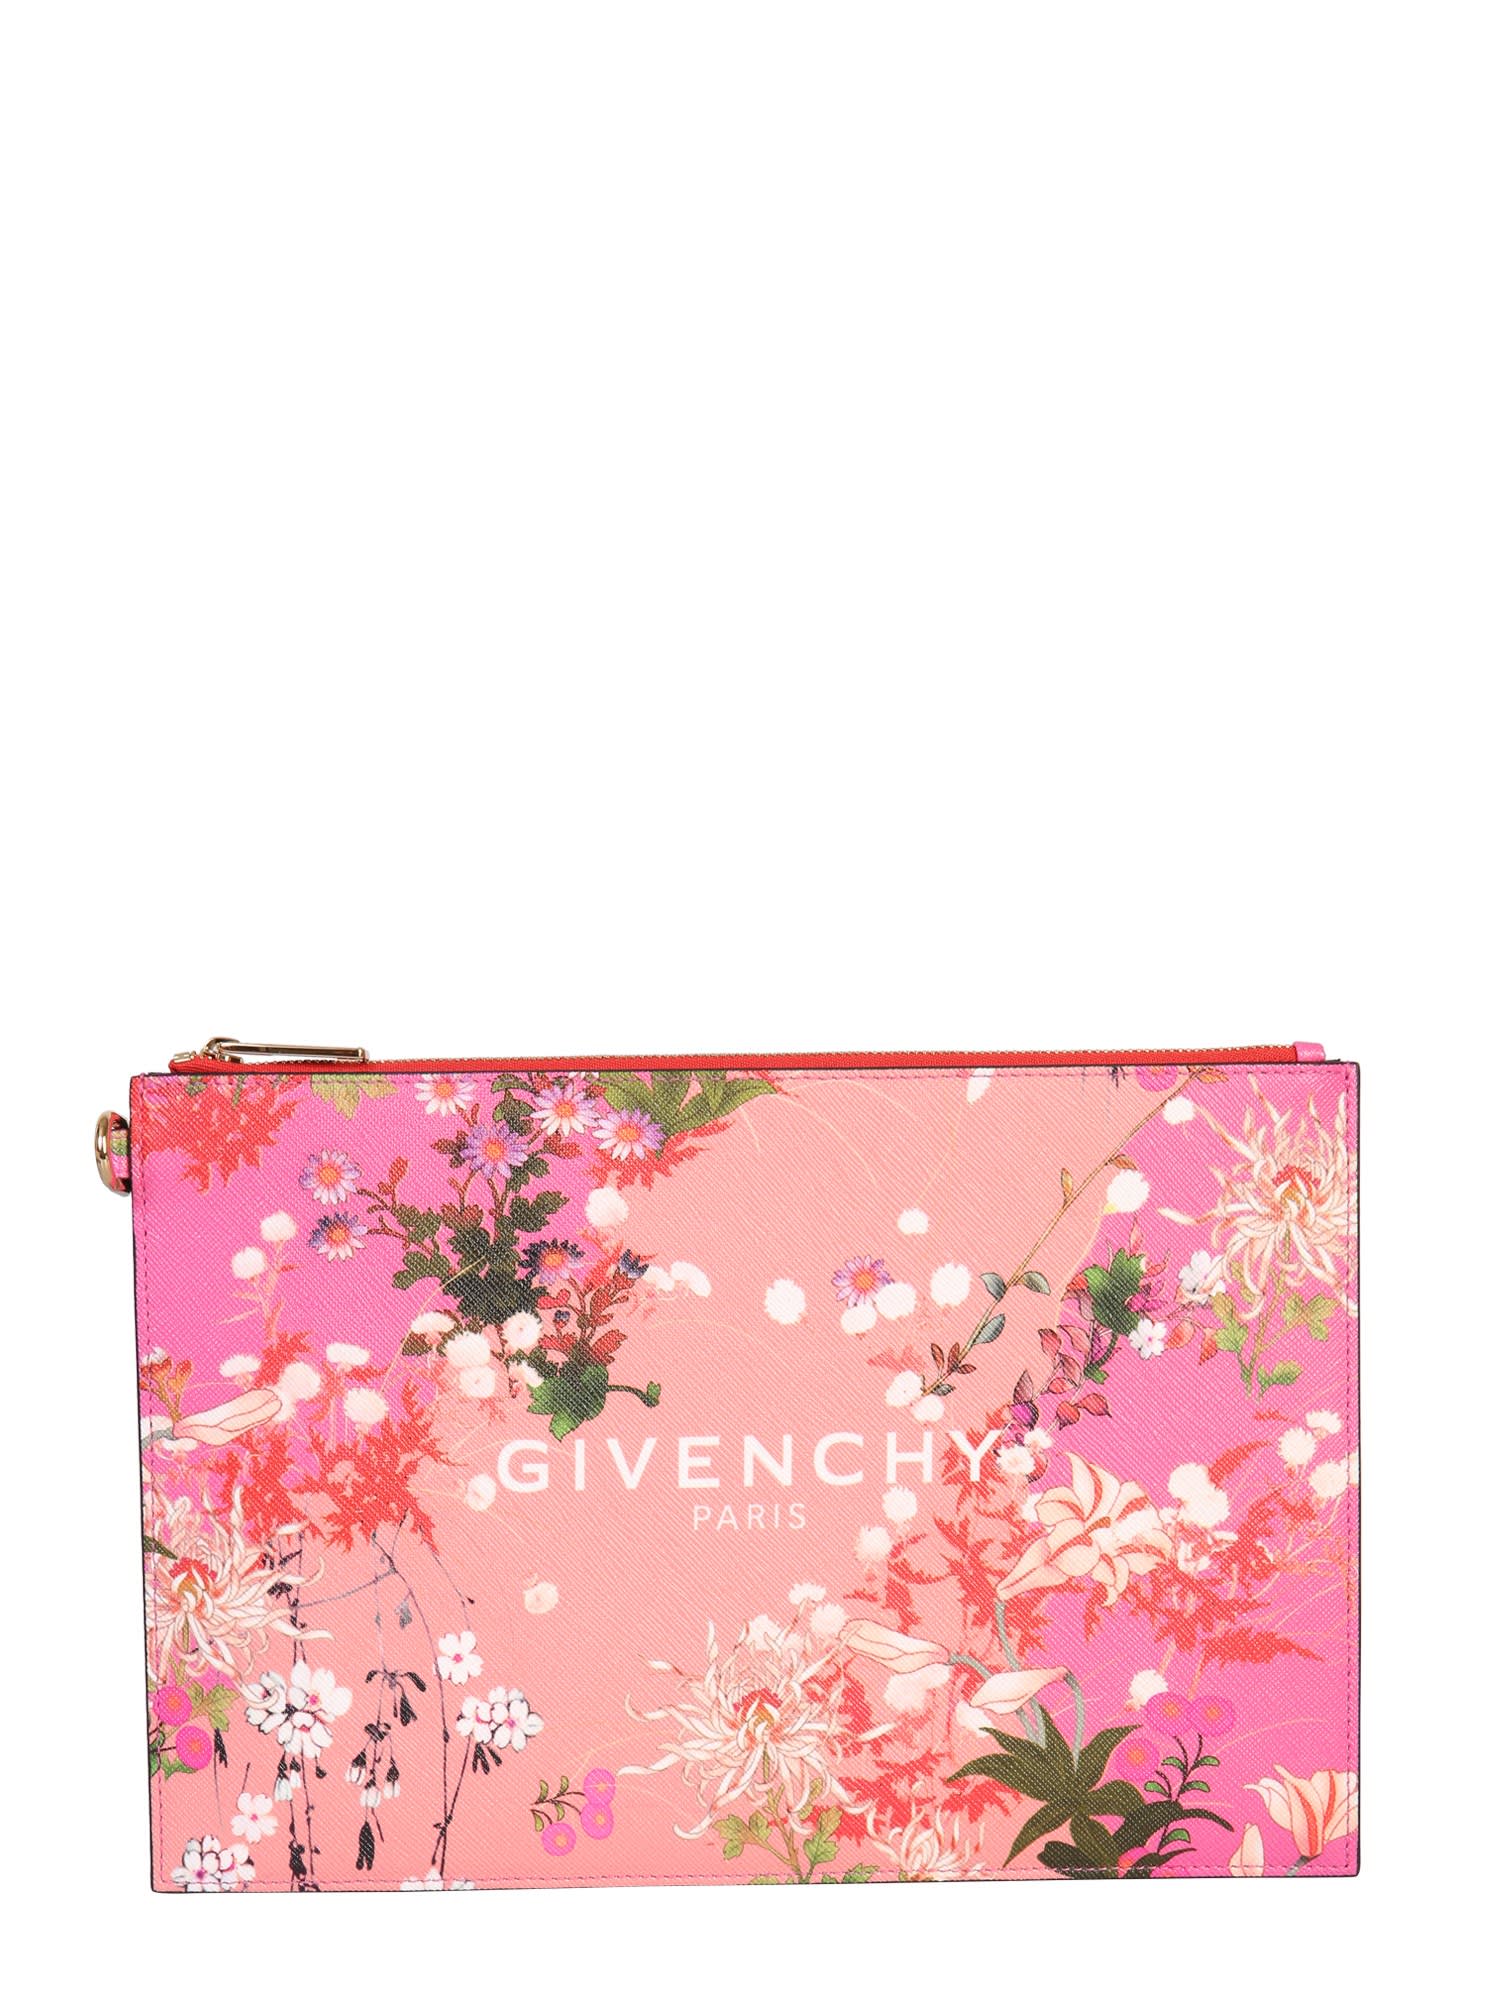 GIVENCHY MEDIUM POUCH WITH LOGO,11220032